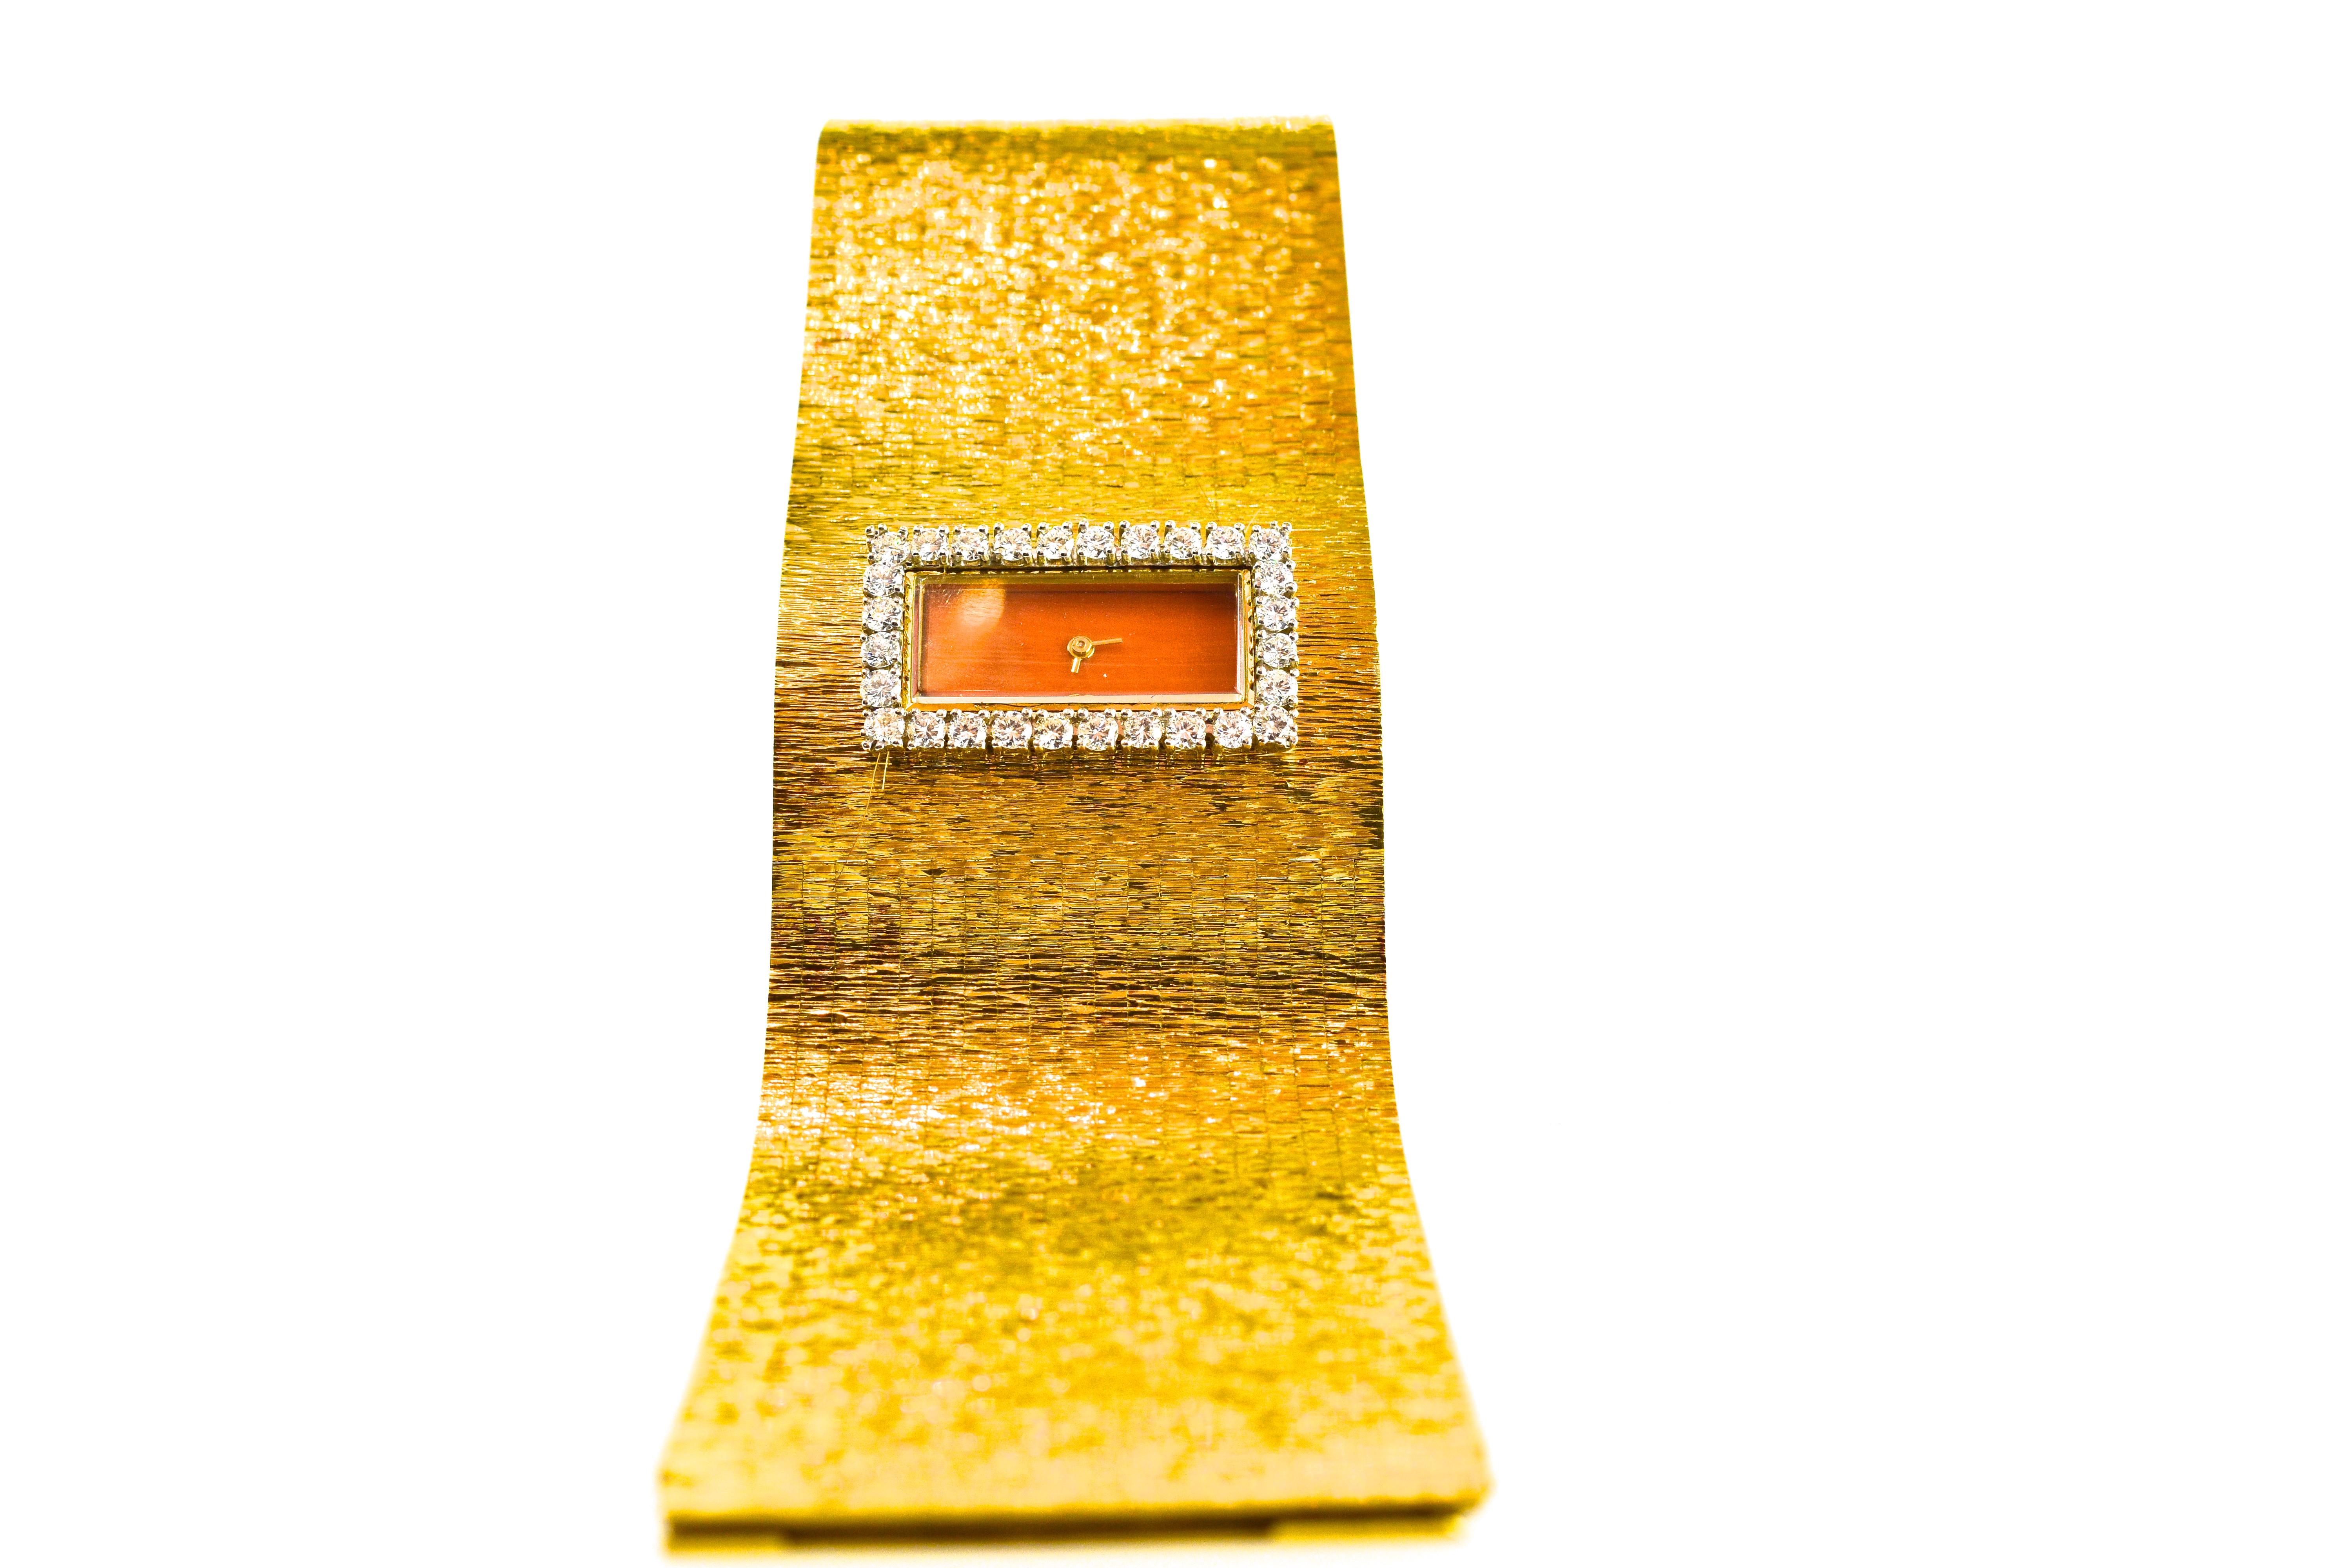 Women's or Men's Watch Bracelet with Diamonds and a Coral Dial, Milner London, circa 1965